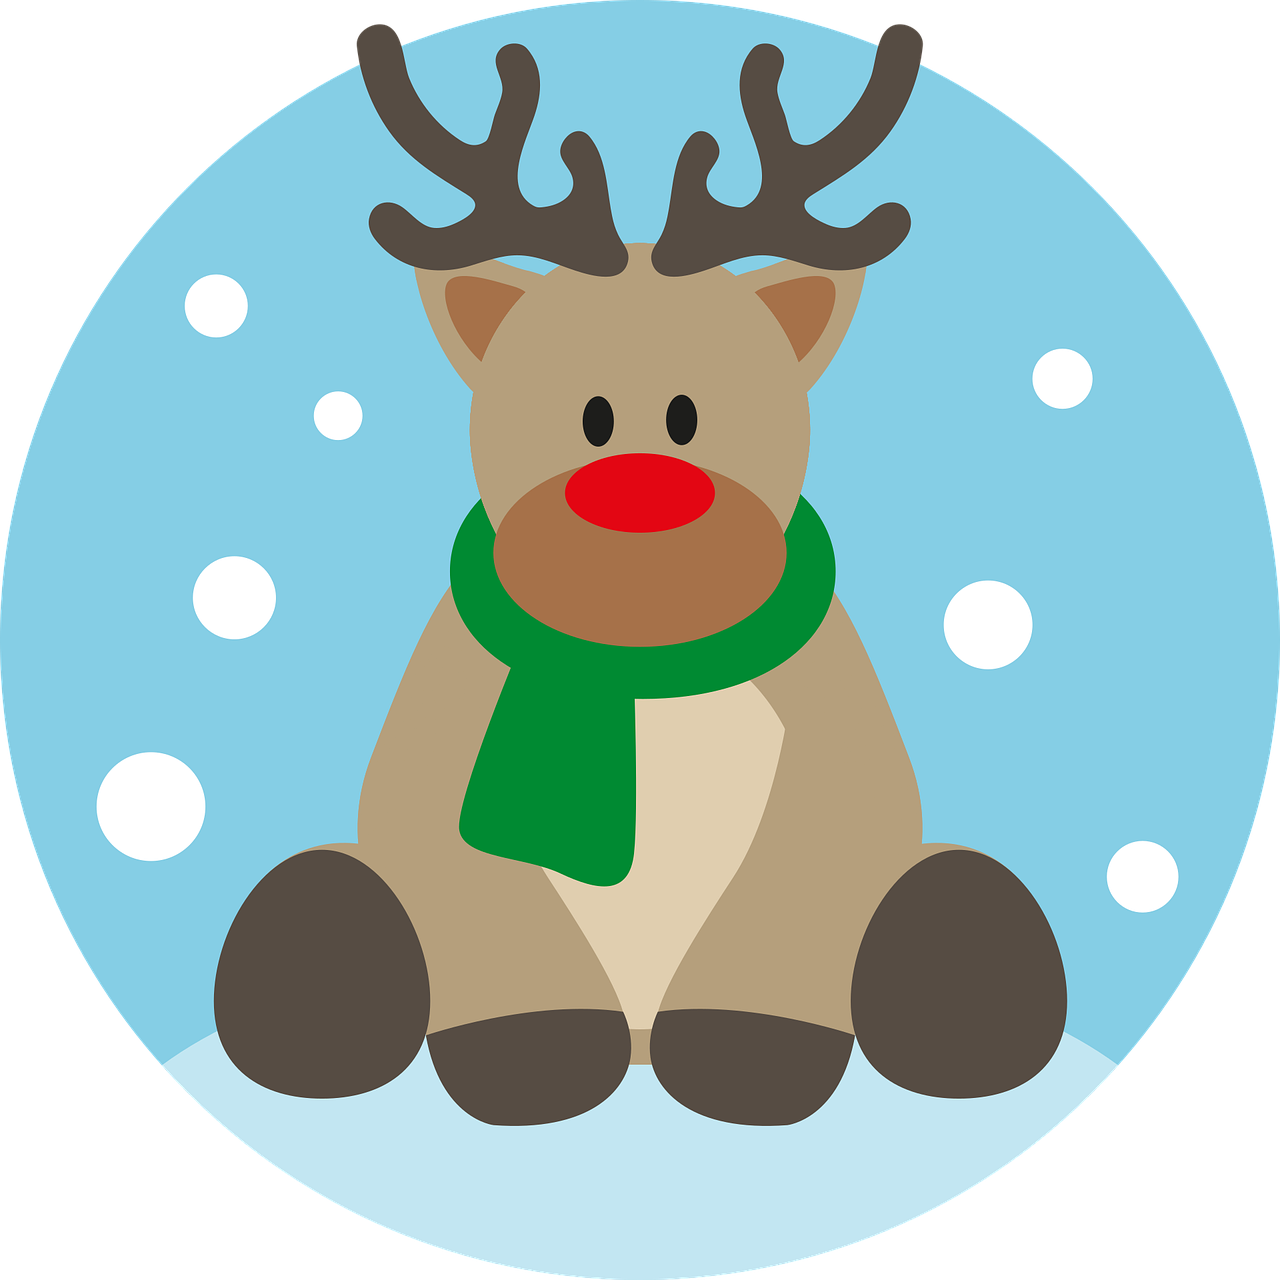 Reindeer with red nose